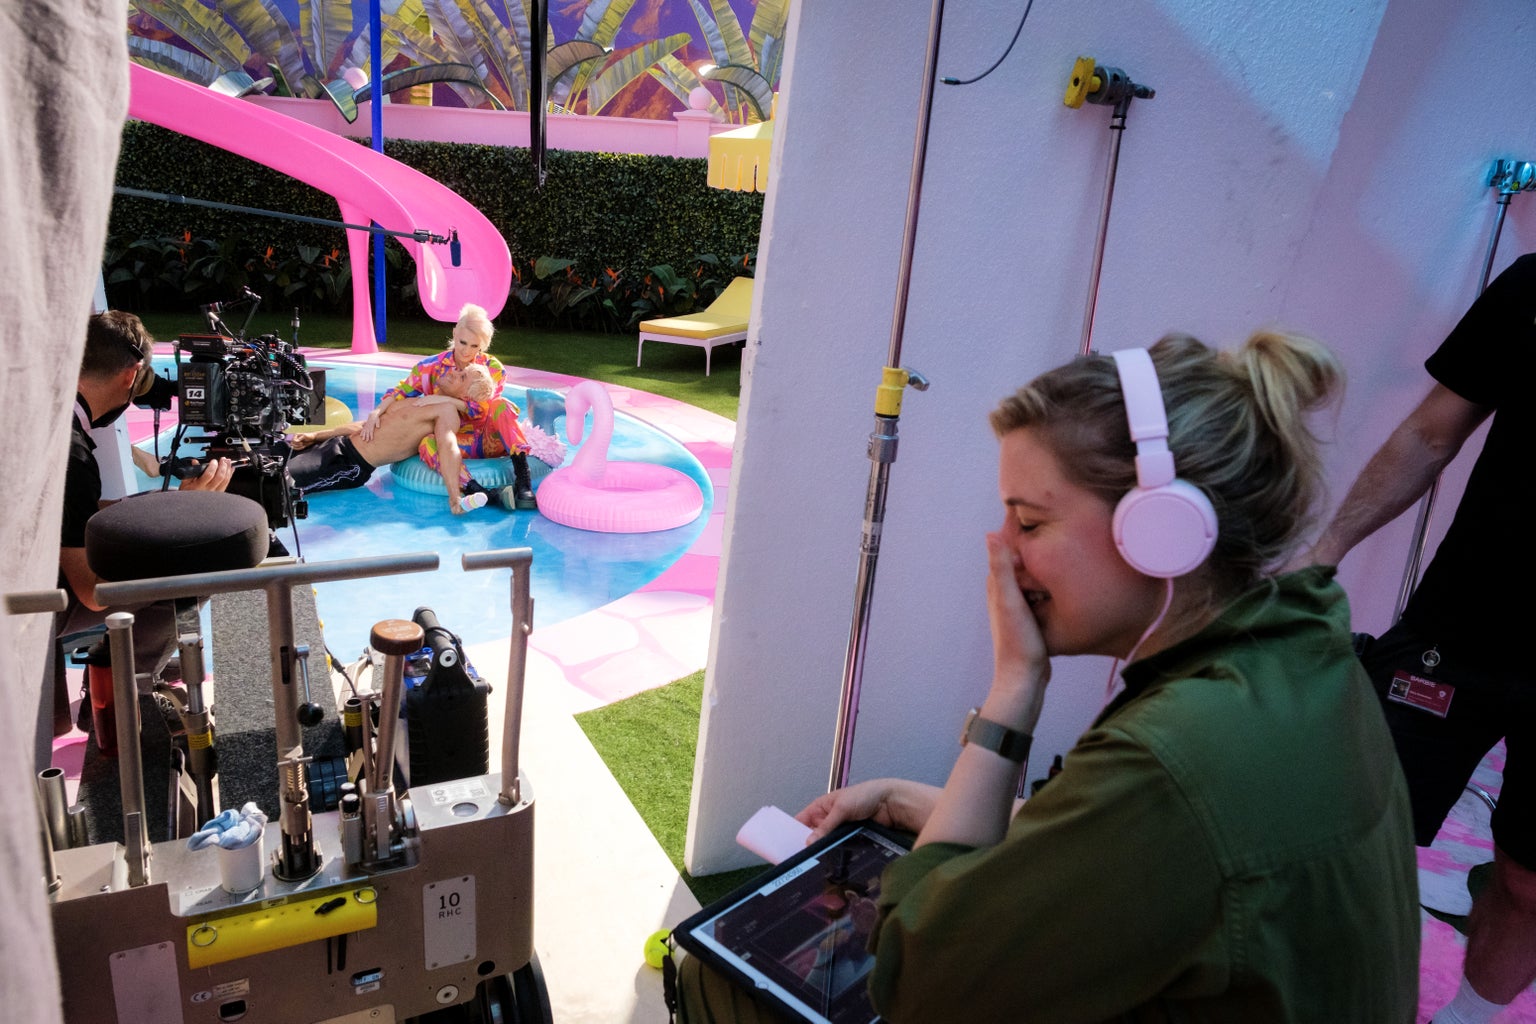 barbie movie behind the scenes 0008?width=1024&height=1024&fit=cover&auto=webp